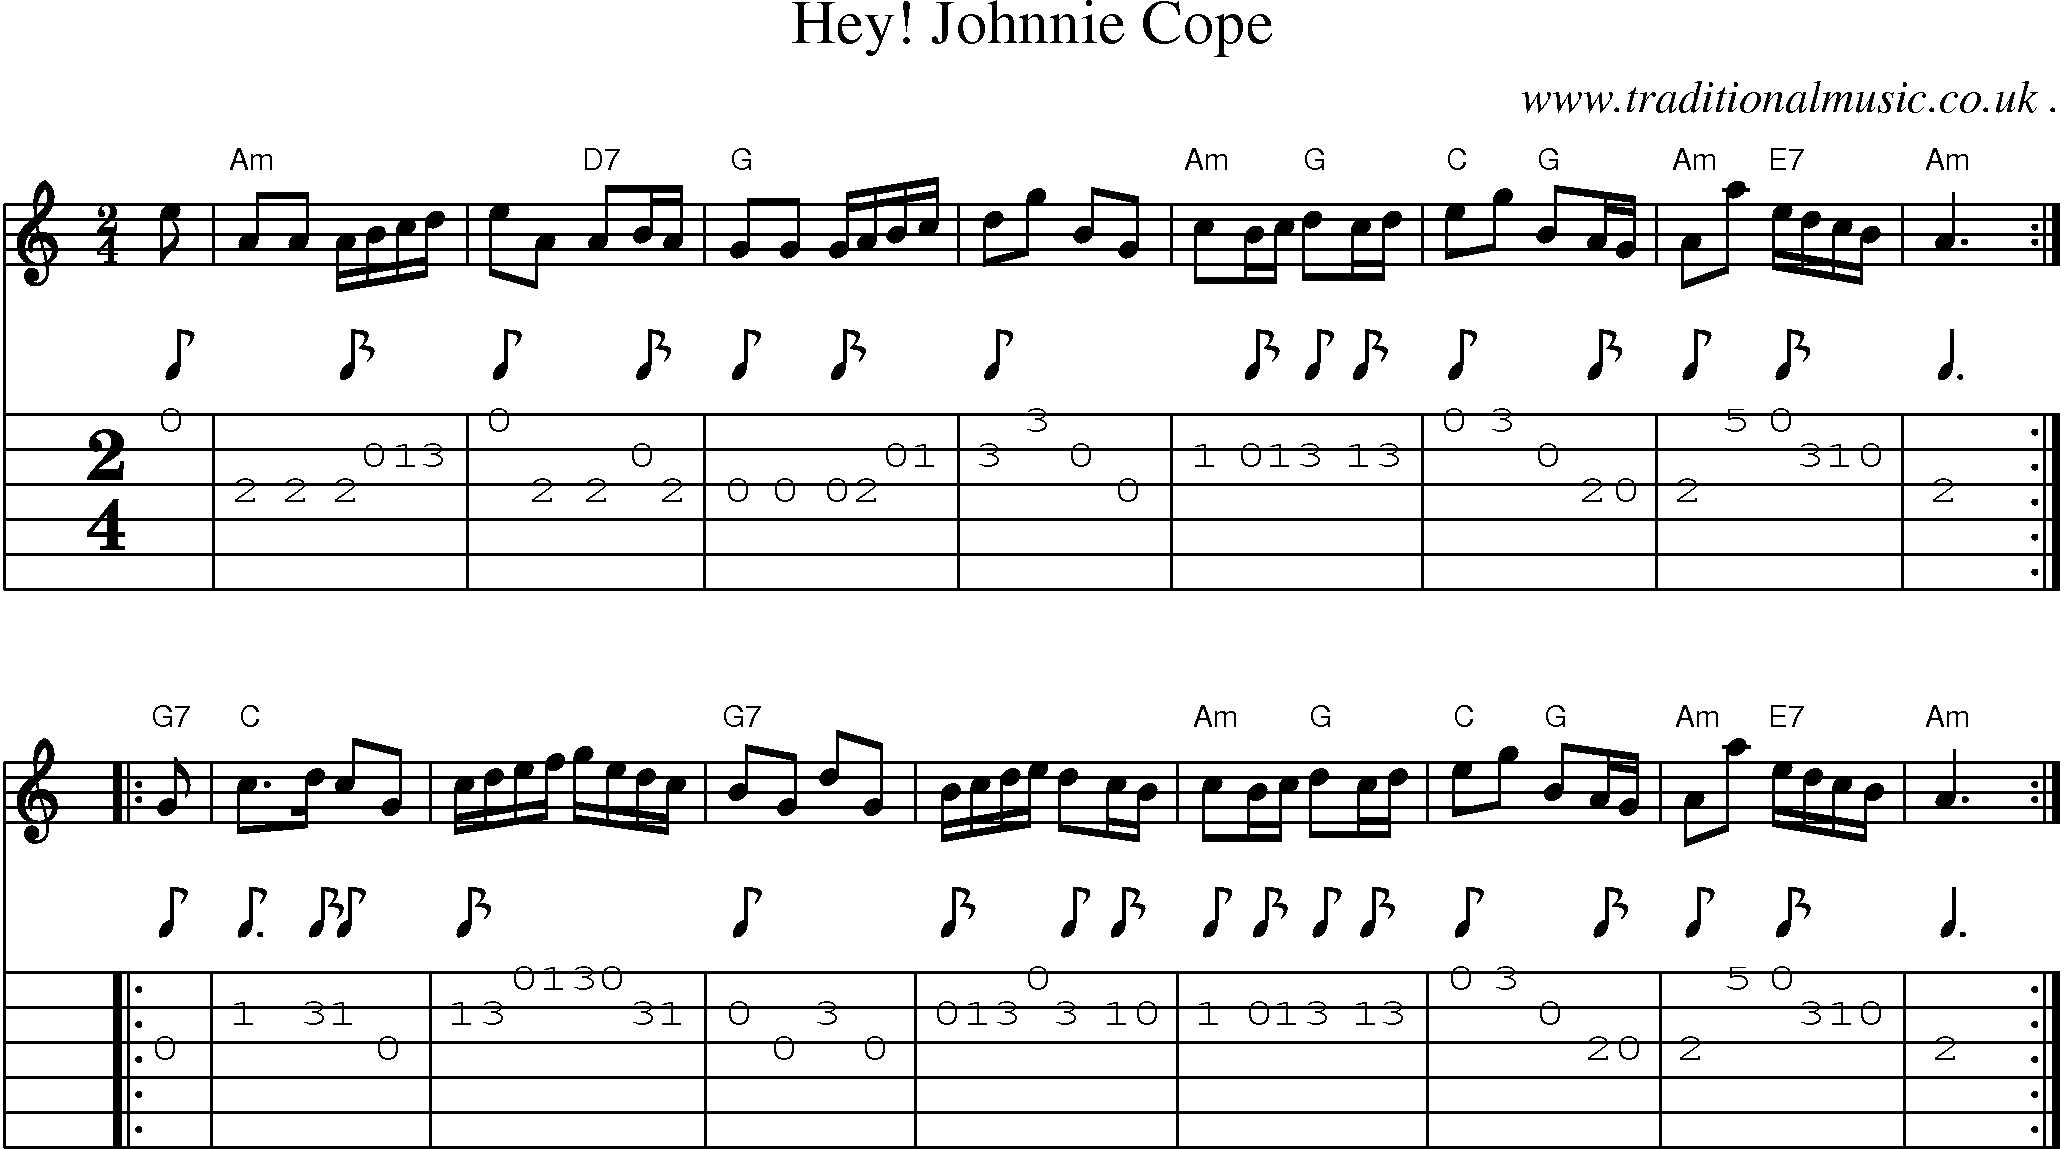 Sheet-music  score, Chords and Guitar Tabs for Hey! Johnnie Cope